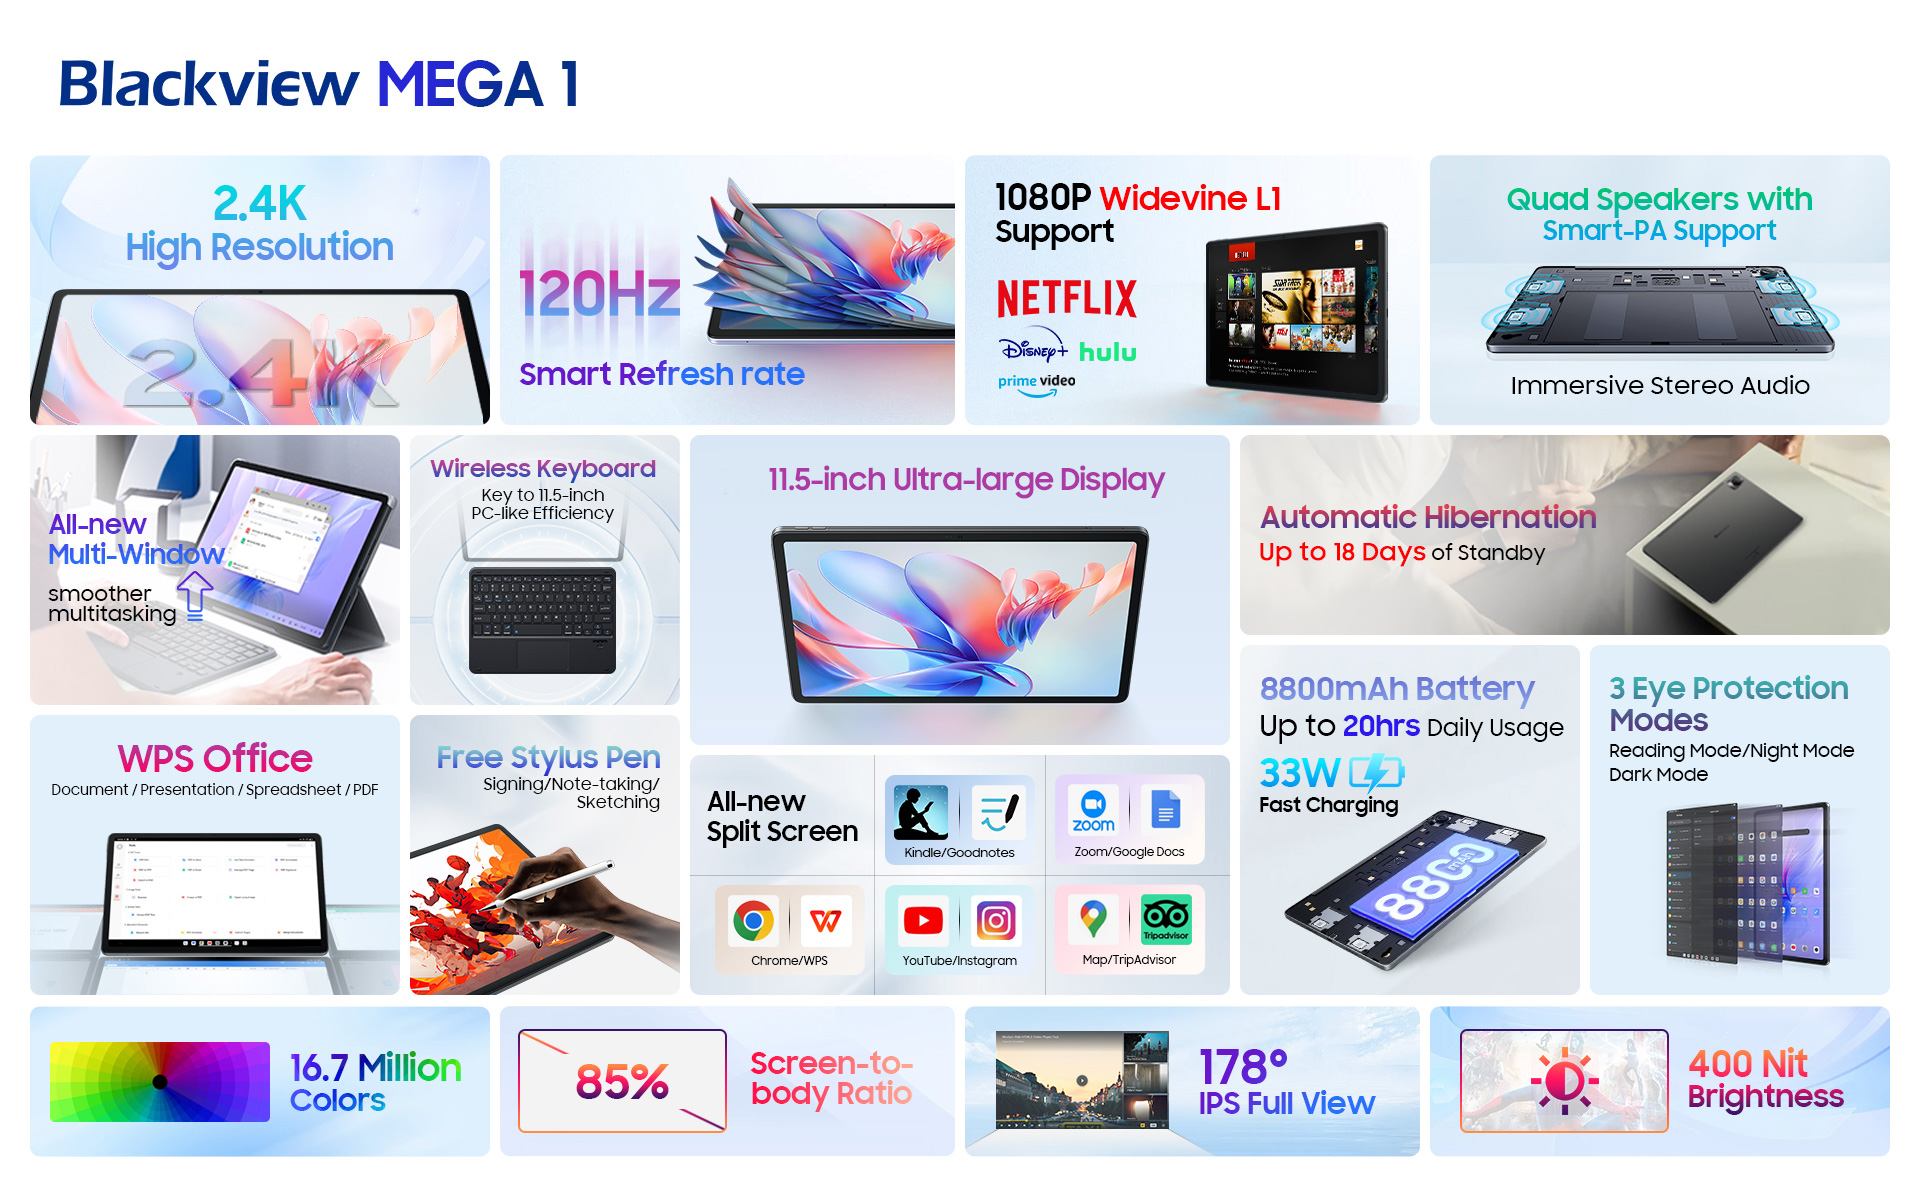 New Mega 1 tablet from Blackview: 11.5-inch display, up to 24 GB of RAM, price - from UAH 9,075